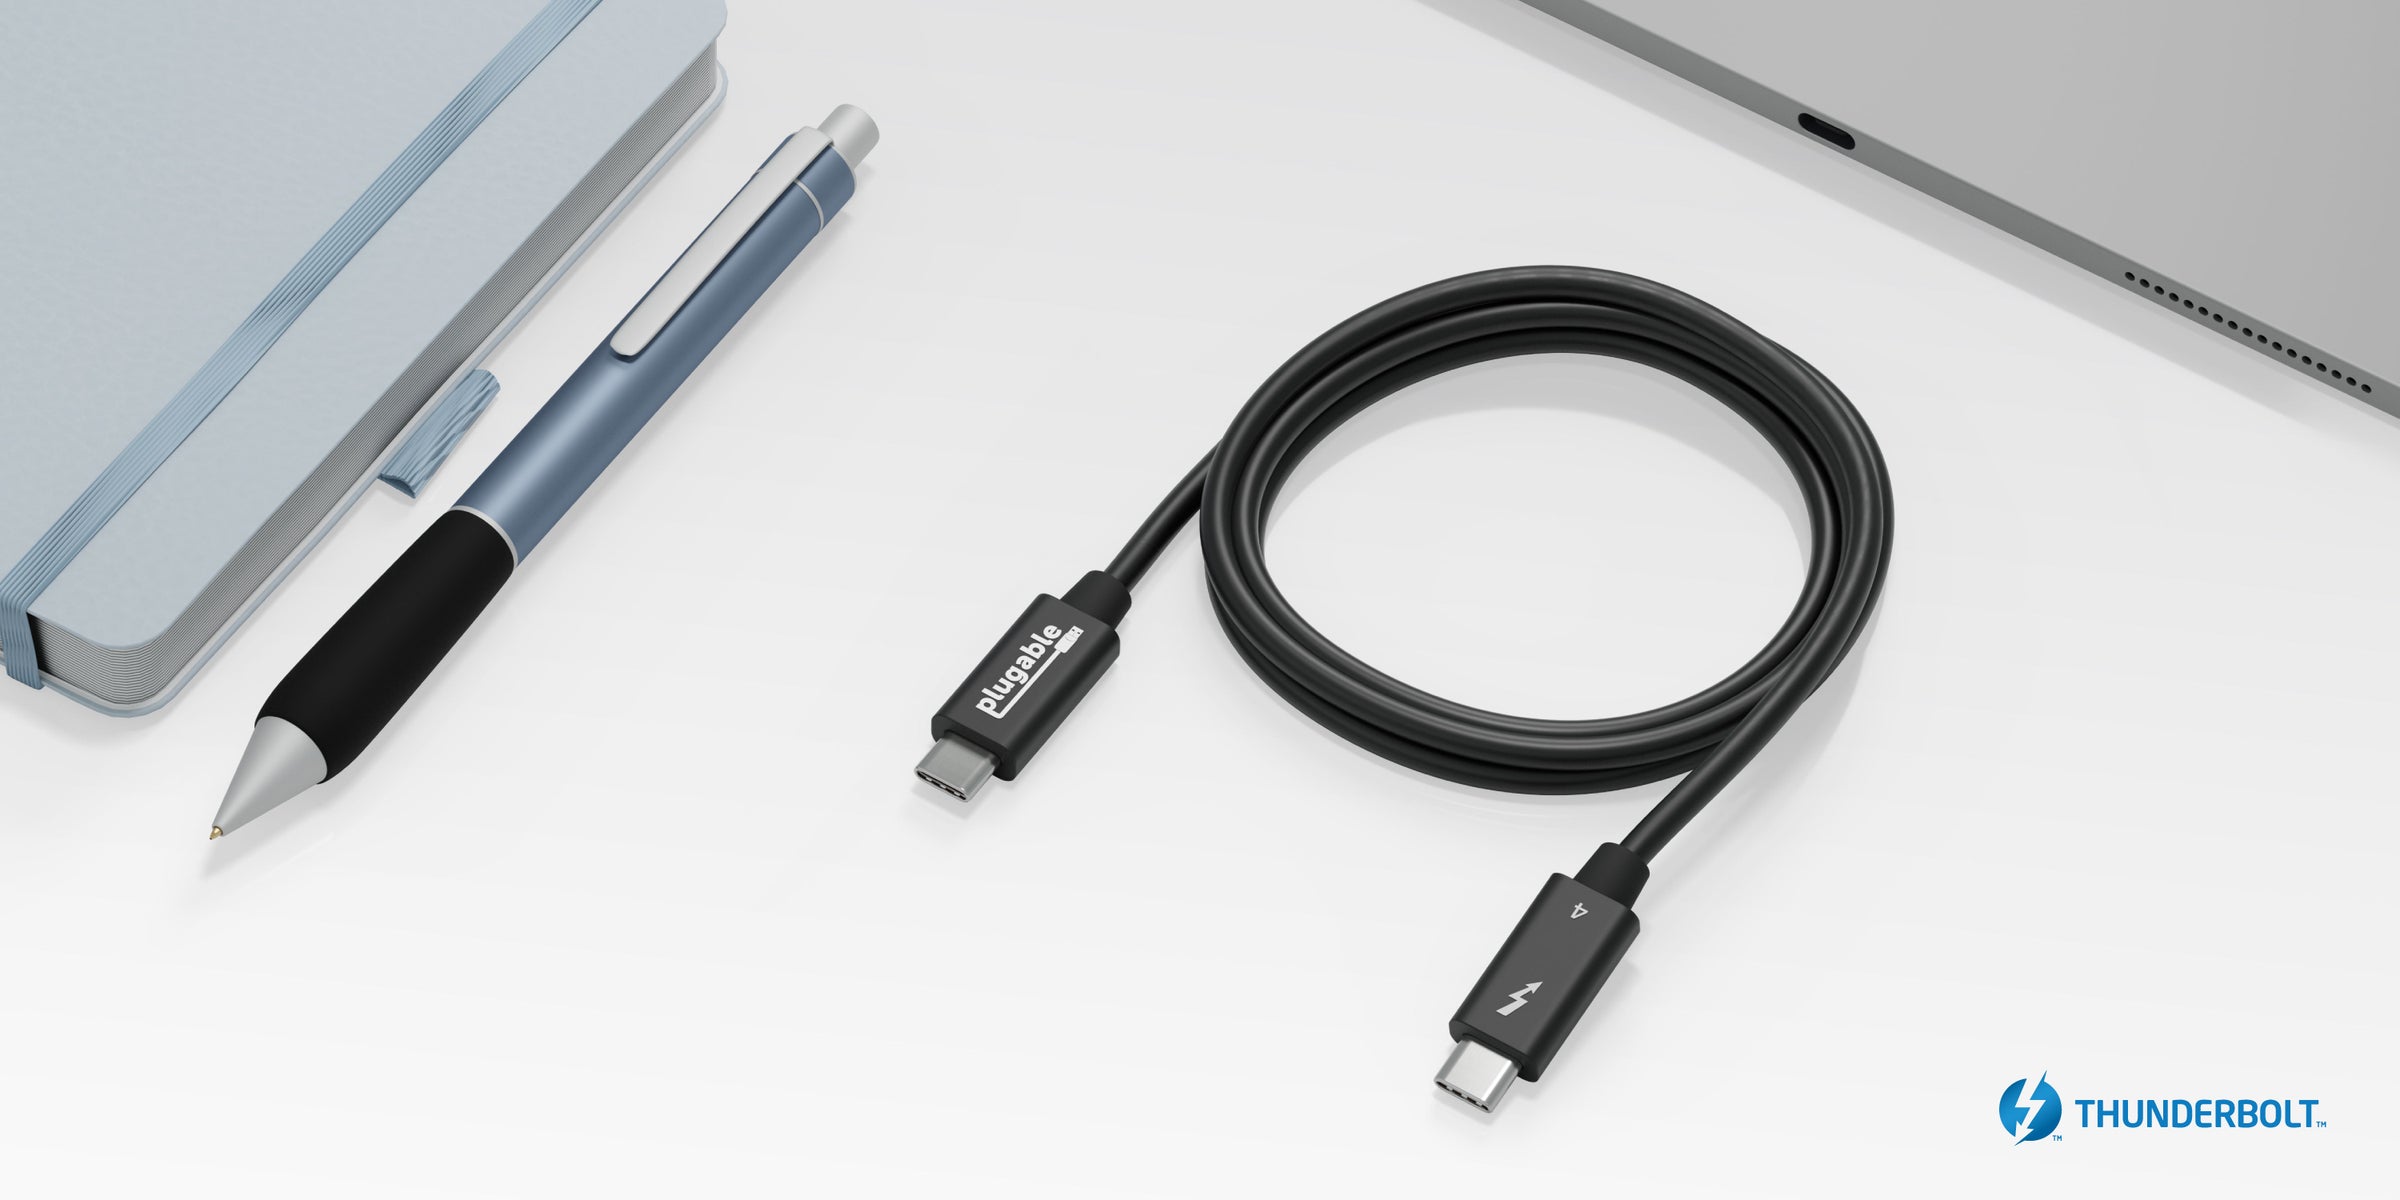 Thunderbolt 4 and USB4 Cables with 240W EPR